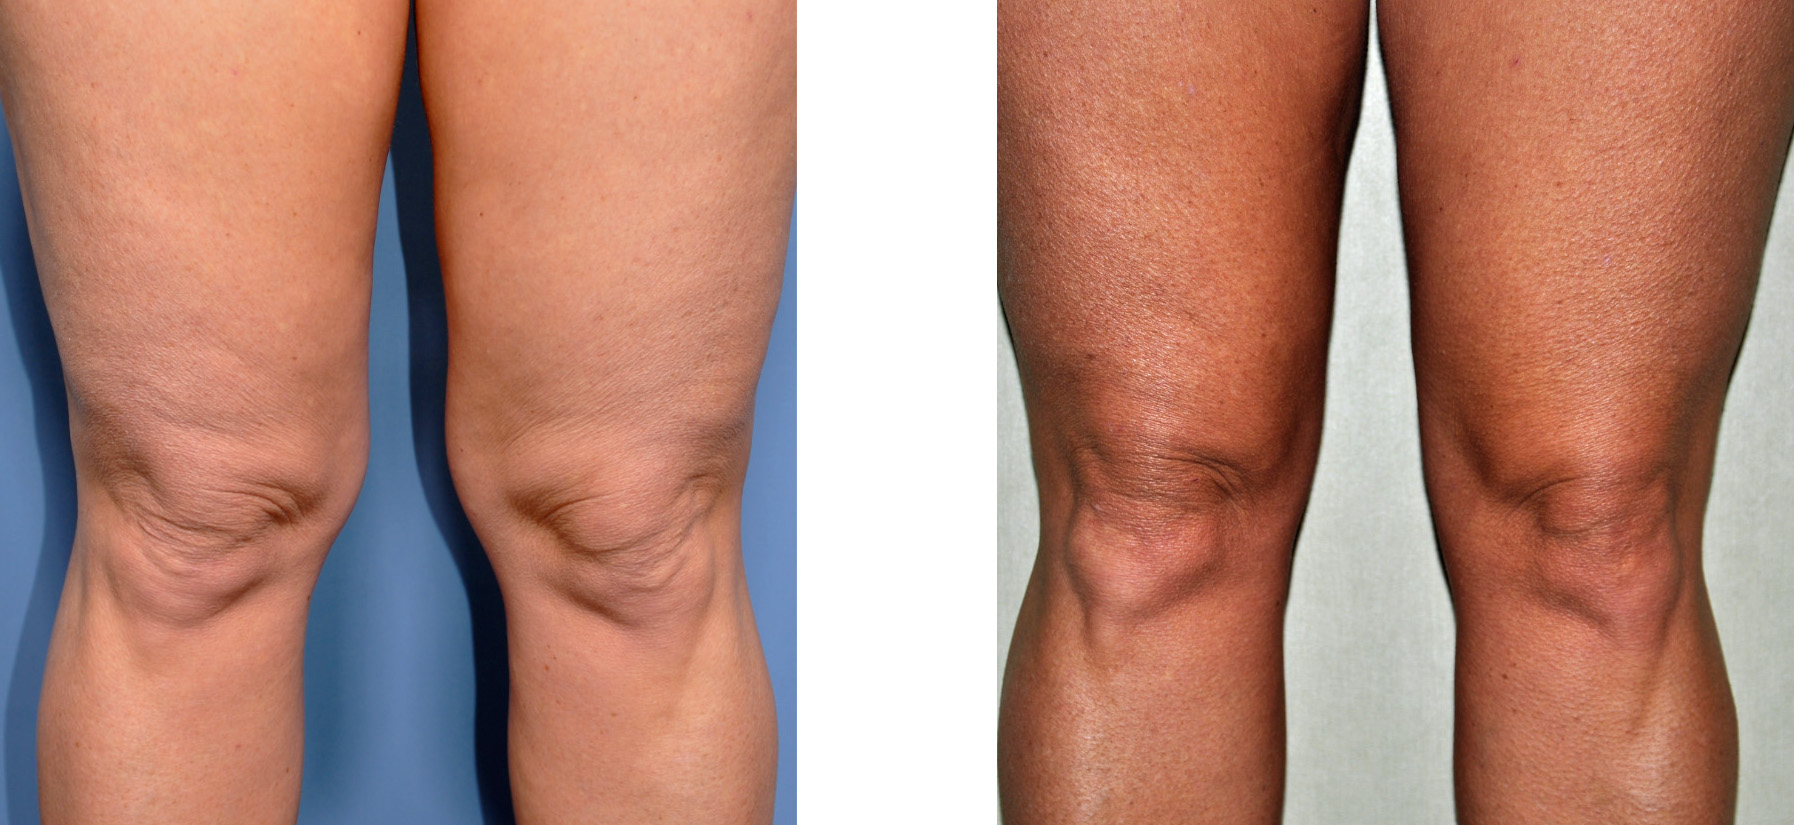 Liposuction of the Knees - Helping to Reshape the Legs - Explore